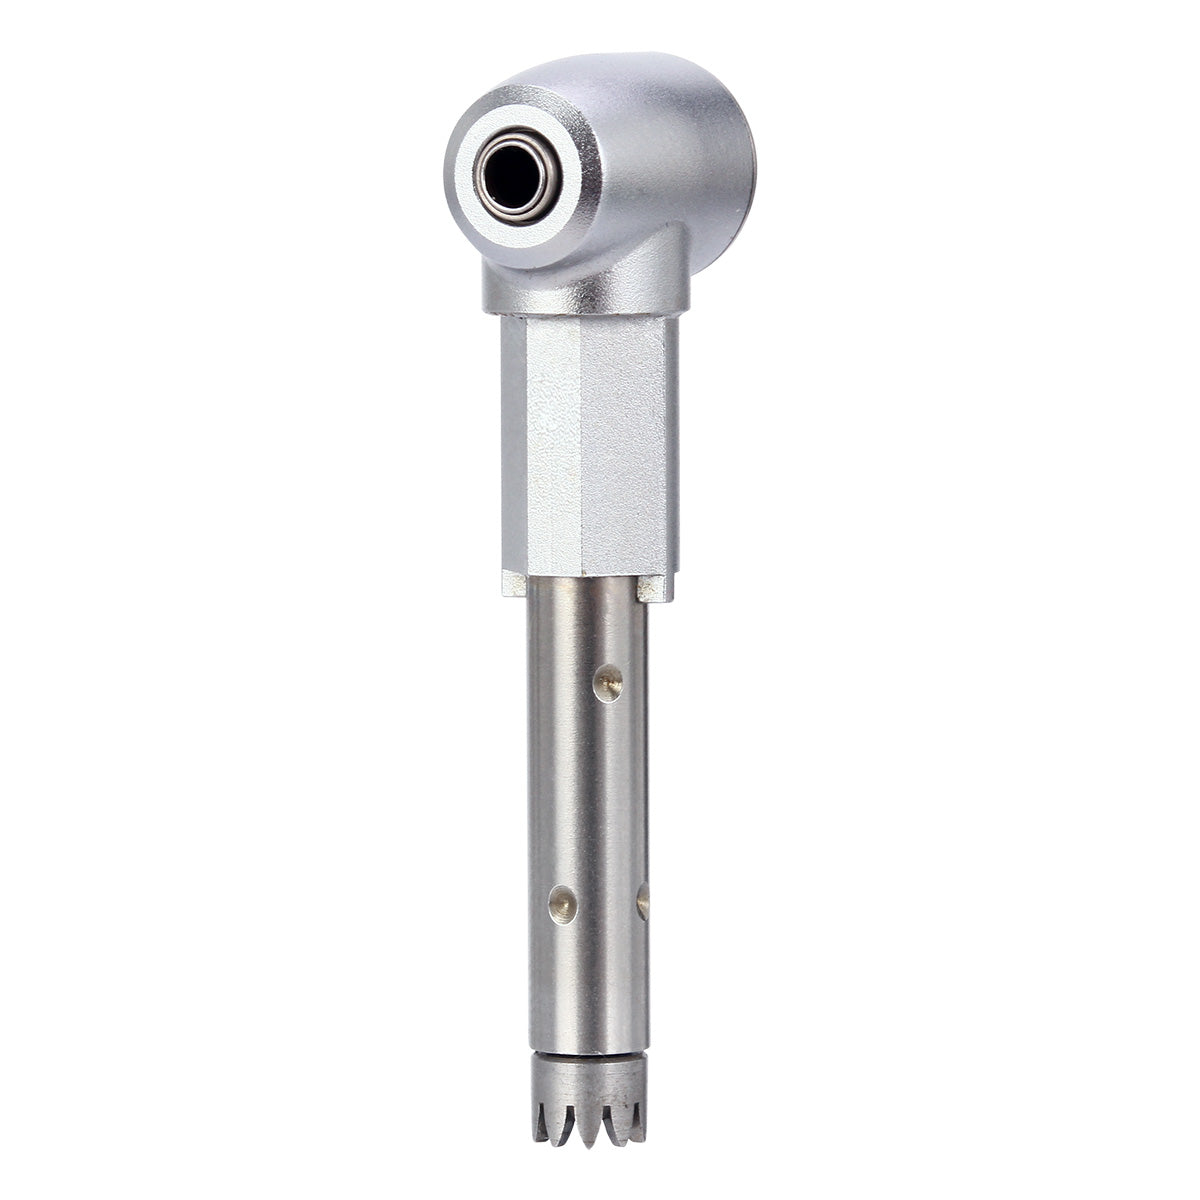 Dental Intra Head 1:1 Push Button Contra Angle Handpiece Low Speed  - pairaydental.com